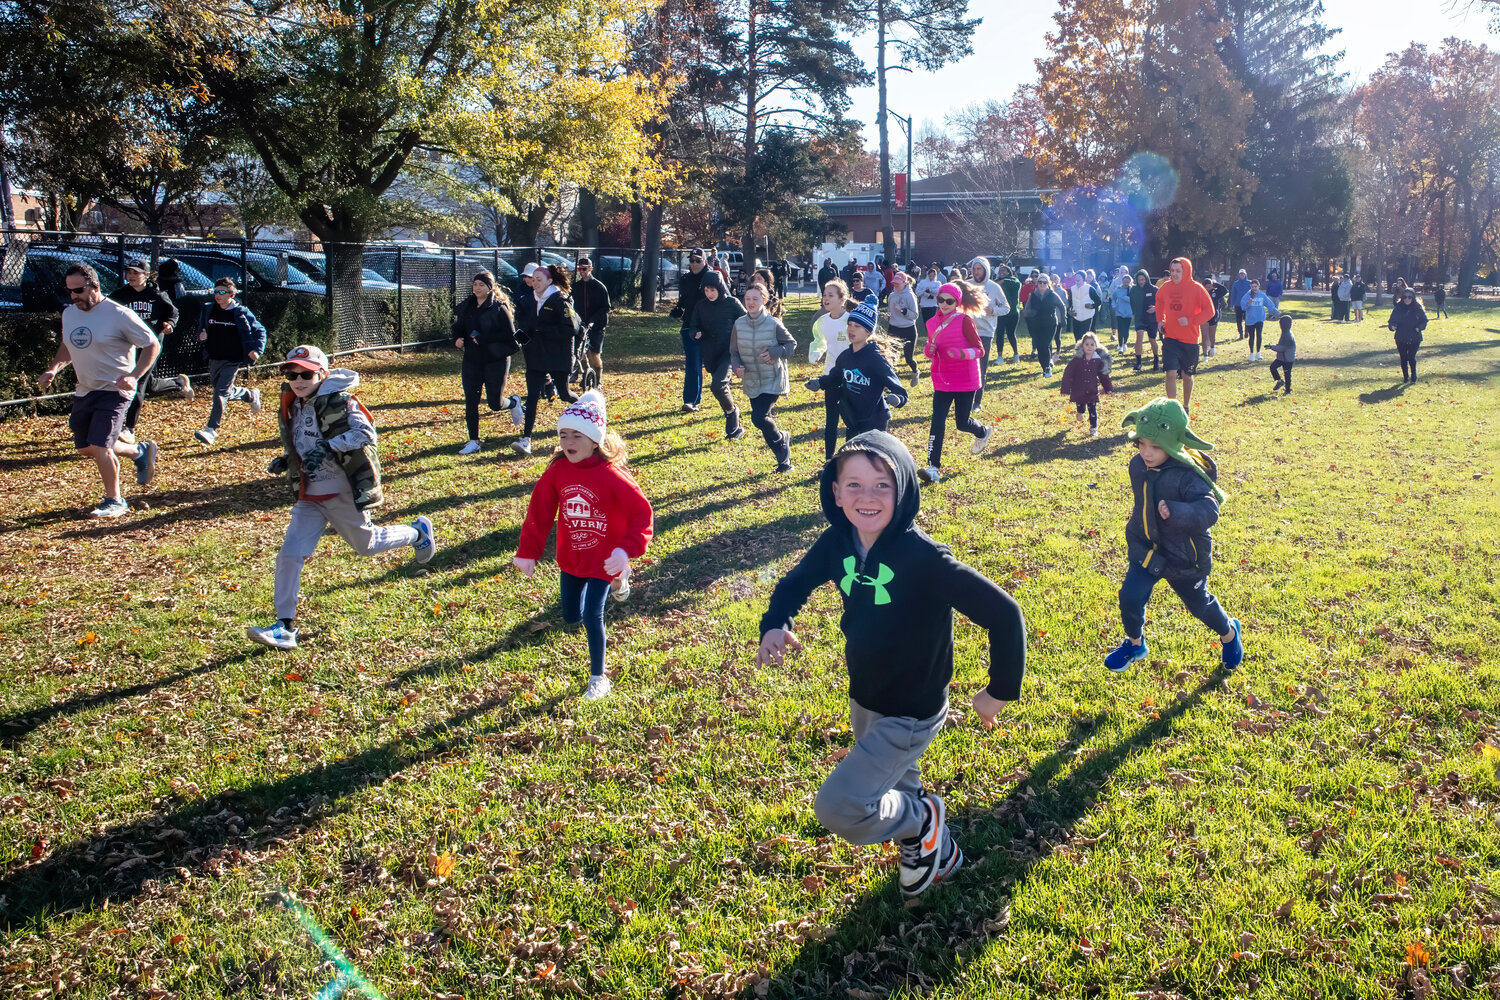 The turkey trot was filled with smiling faces of all ages who came out to support Mended Little Hearts, an organization that advocates for people with congenital heart defects.